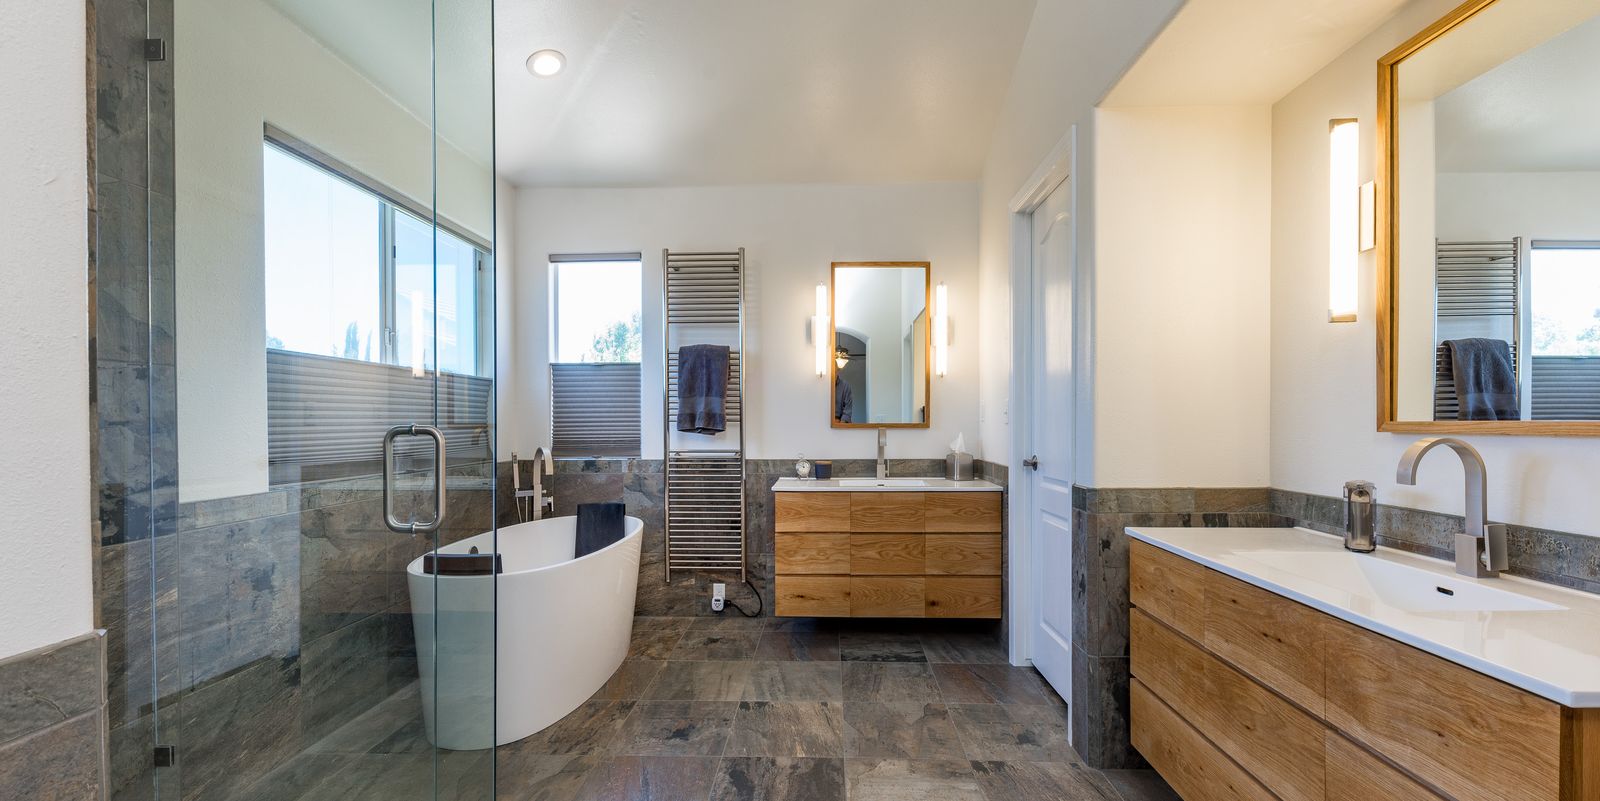 How Much Does a Bathroom Remodel Cost in Fresno, California?